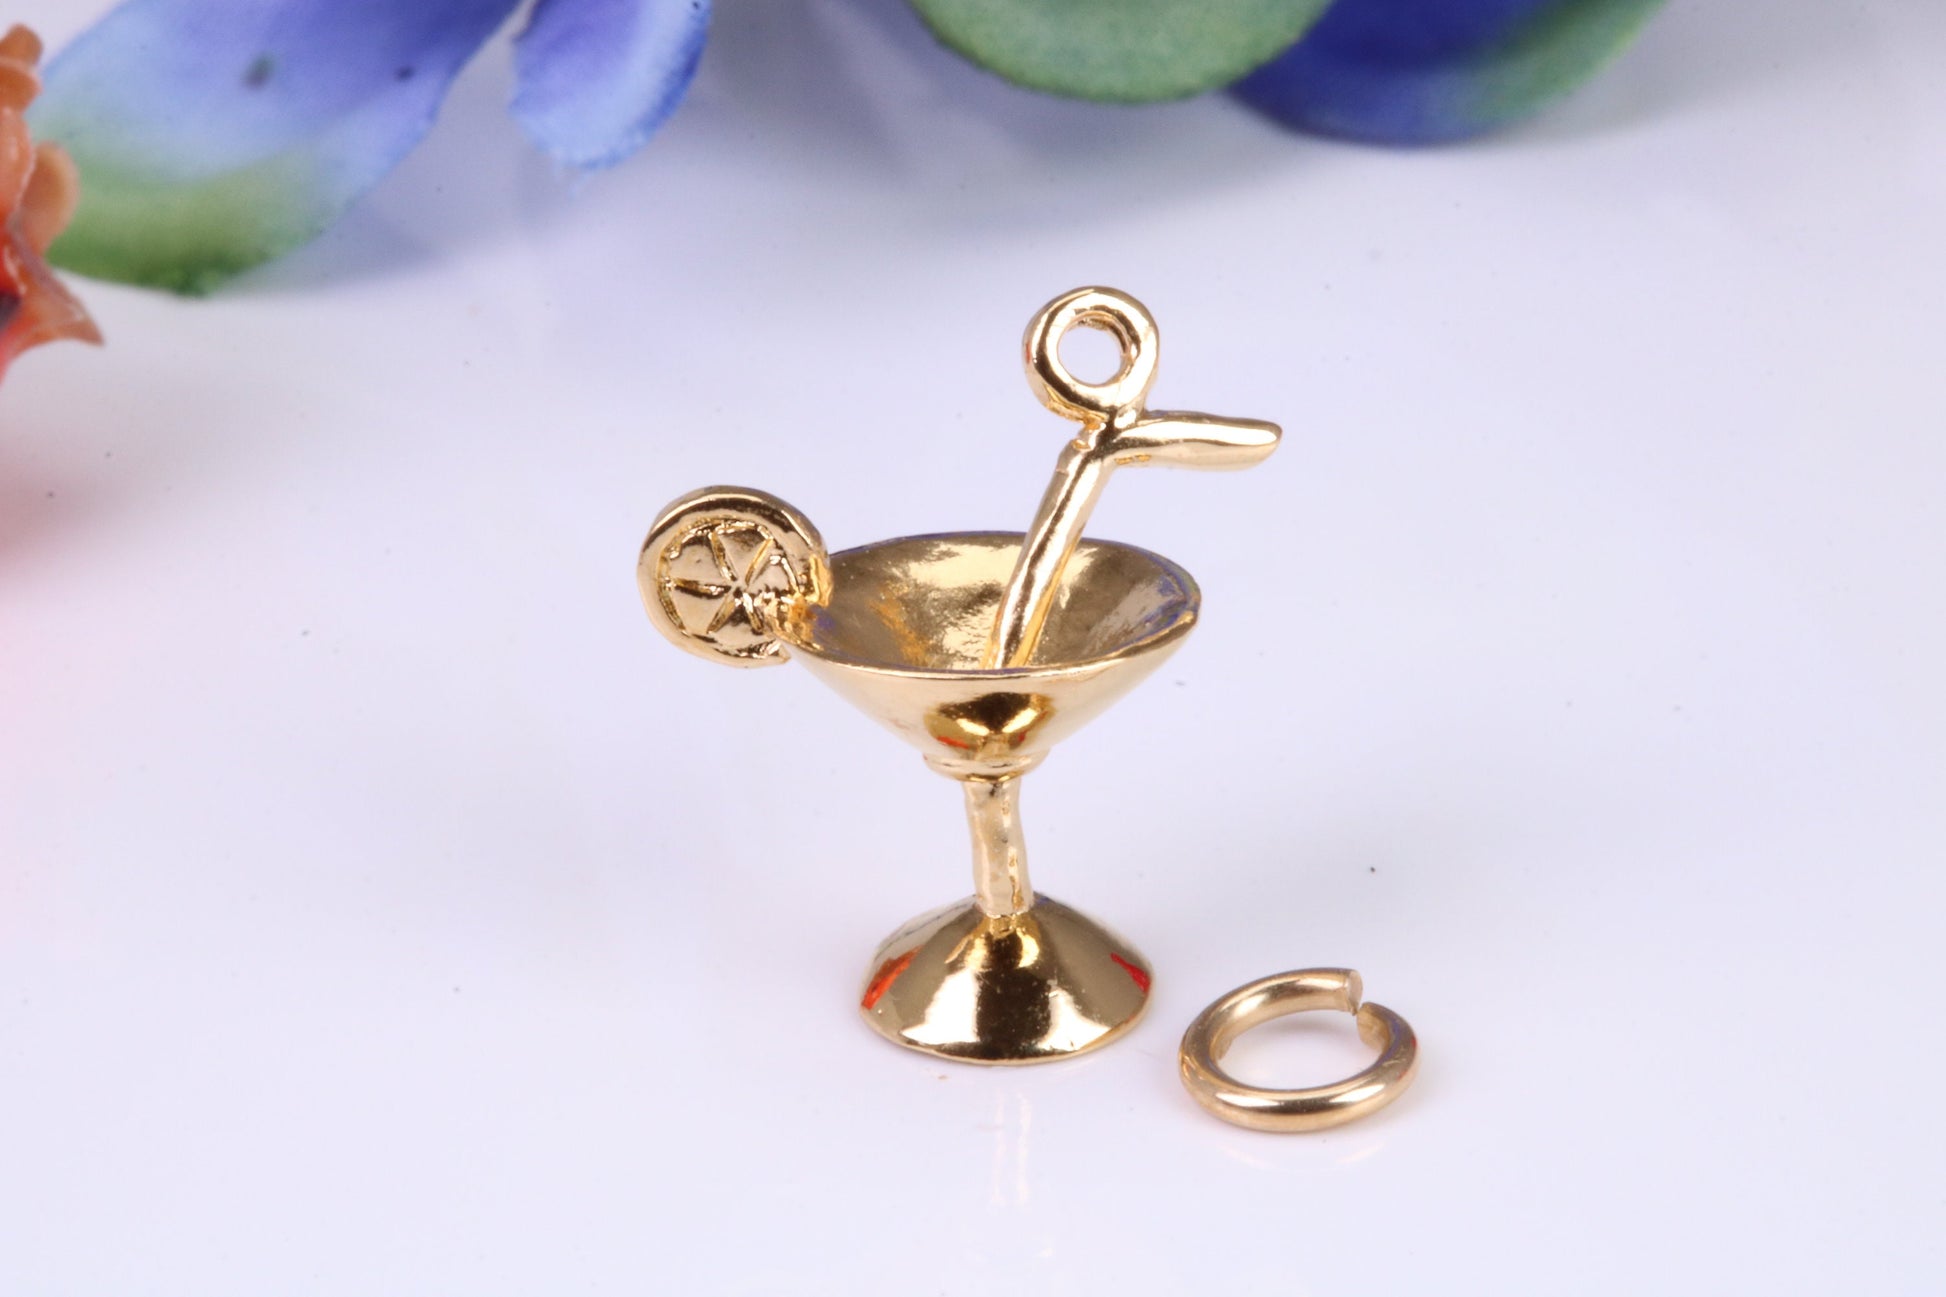 Cocktail Glass Charm, Traditional Charm, Made from Solid Yellow Gold, British Hallmarked, Complete with Attachment Link